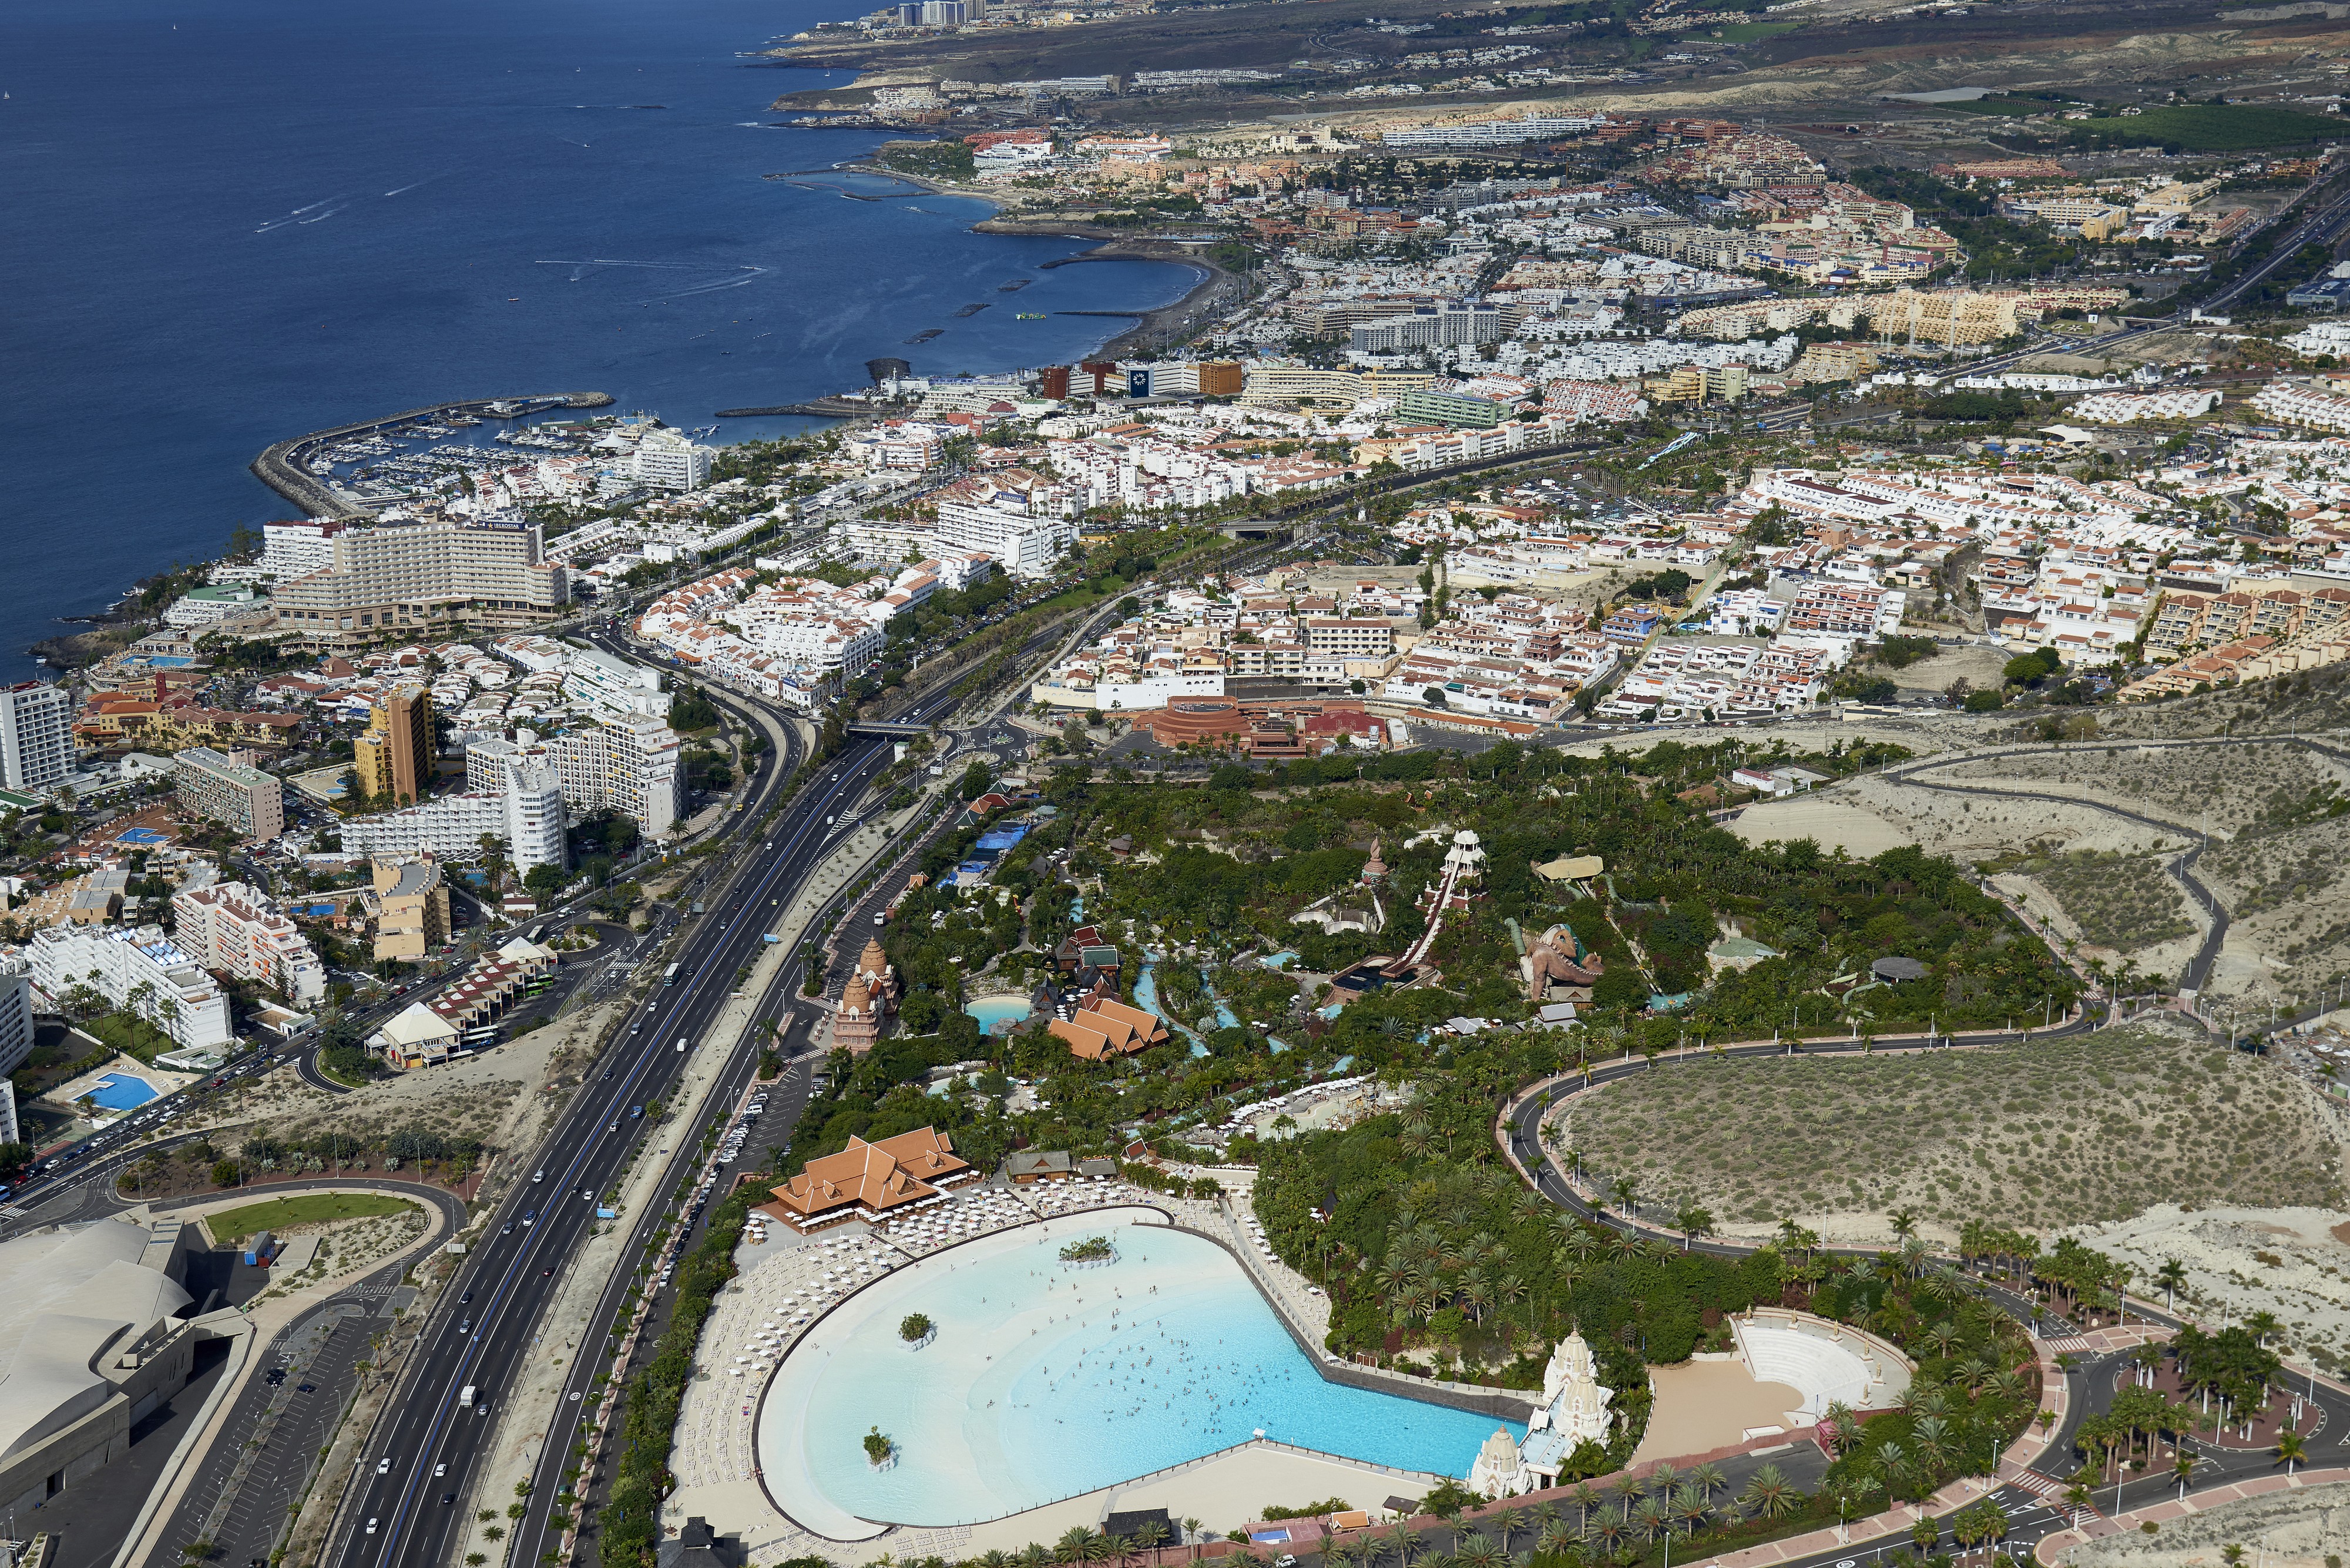 A0461 Tenerife, Adeje and Siam Park aerial view